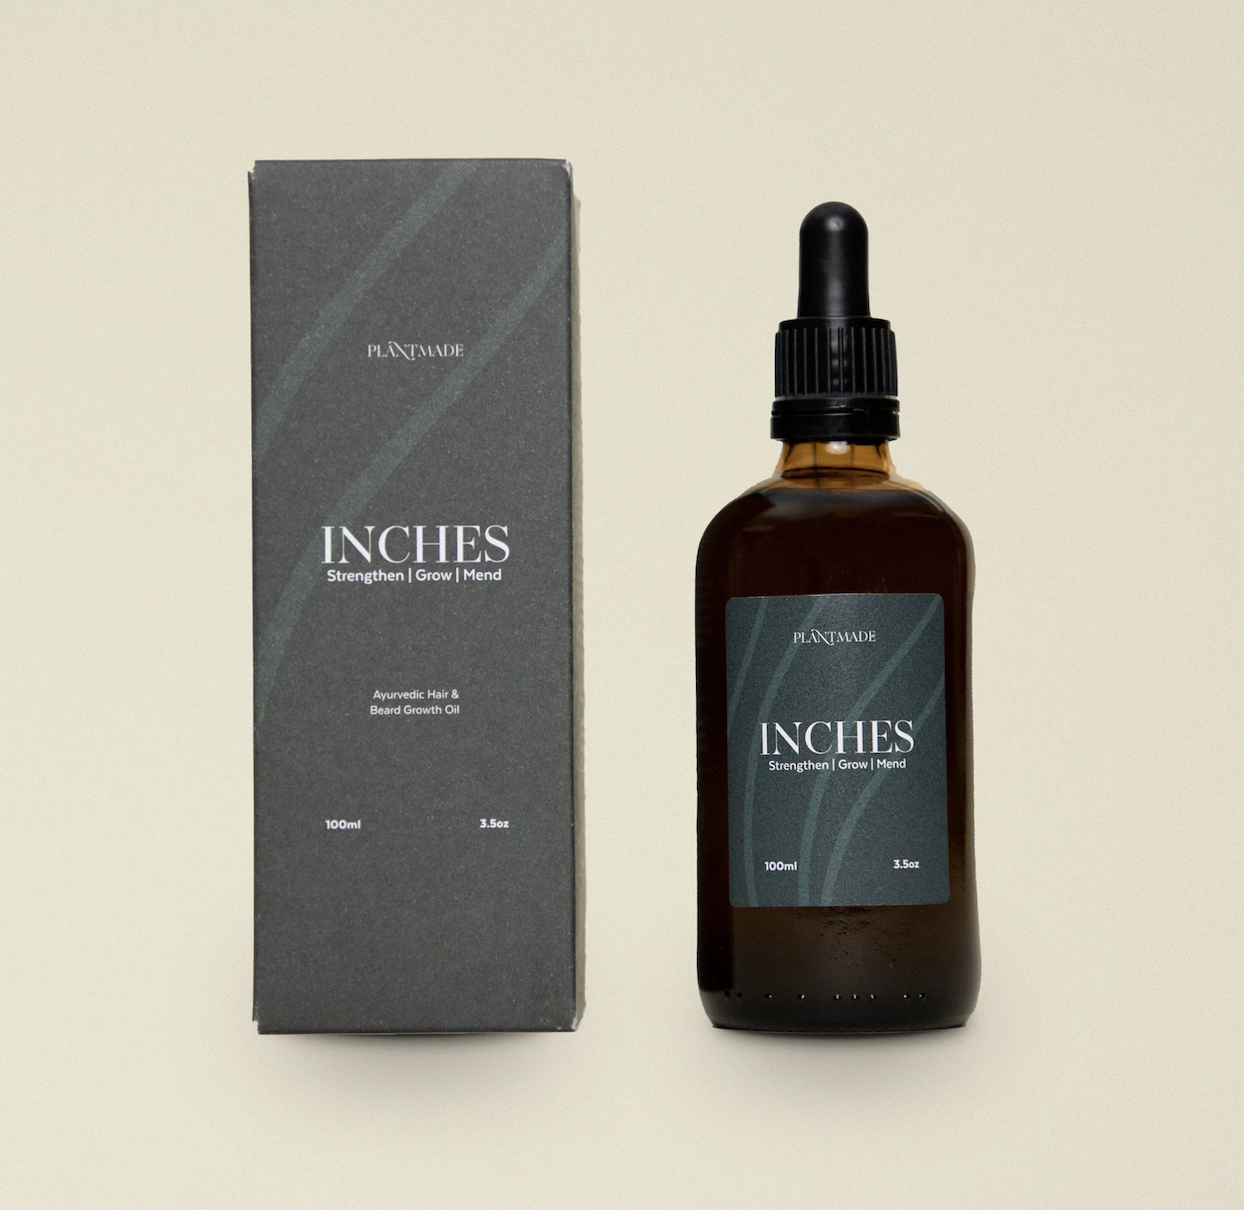 The packaging and bottle of Inches, Plantmade&#x27;s bestselling product